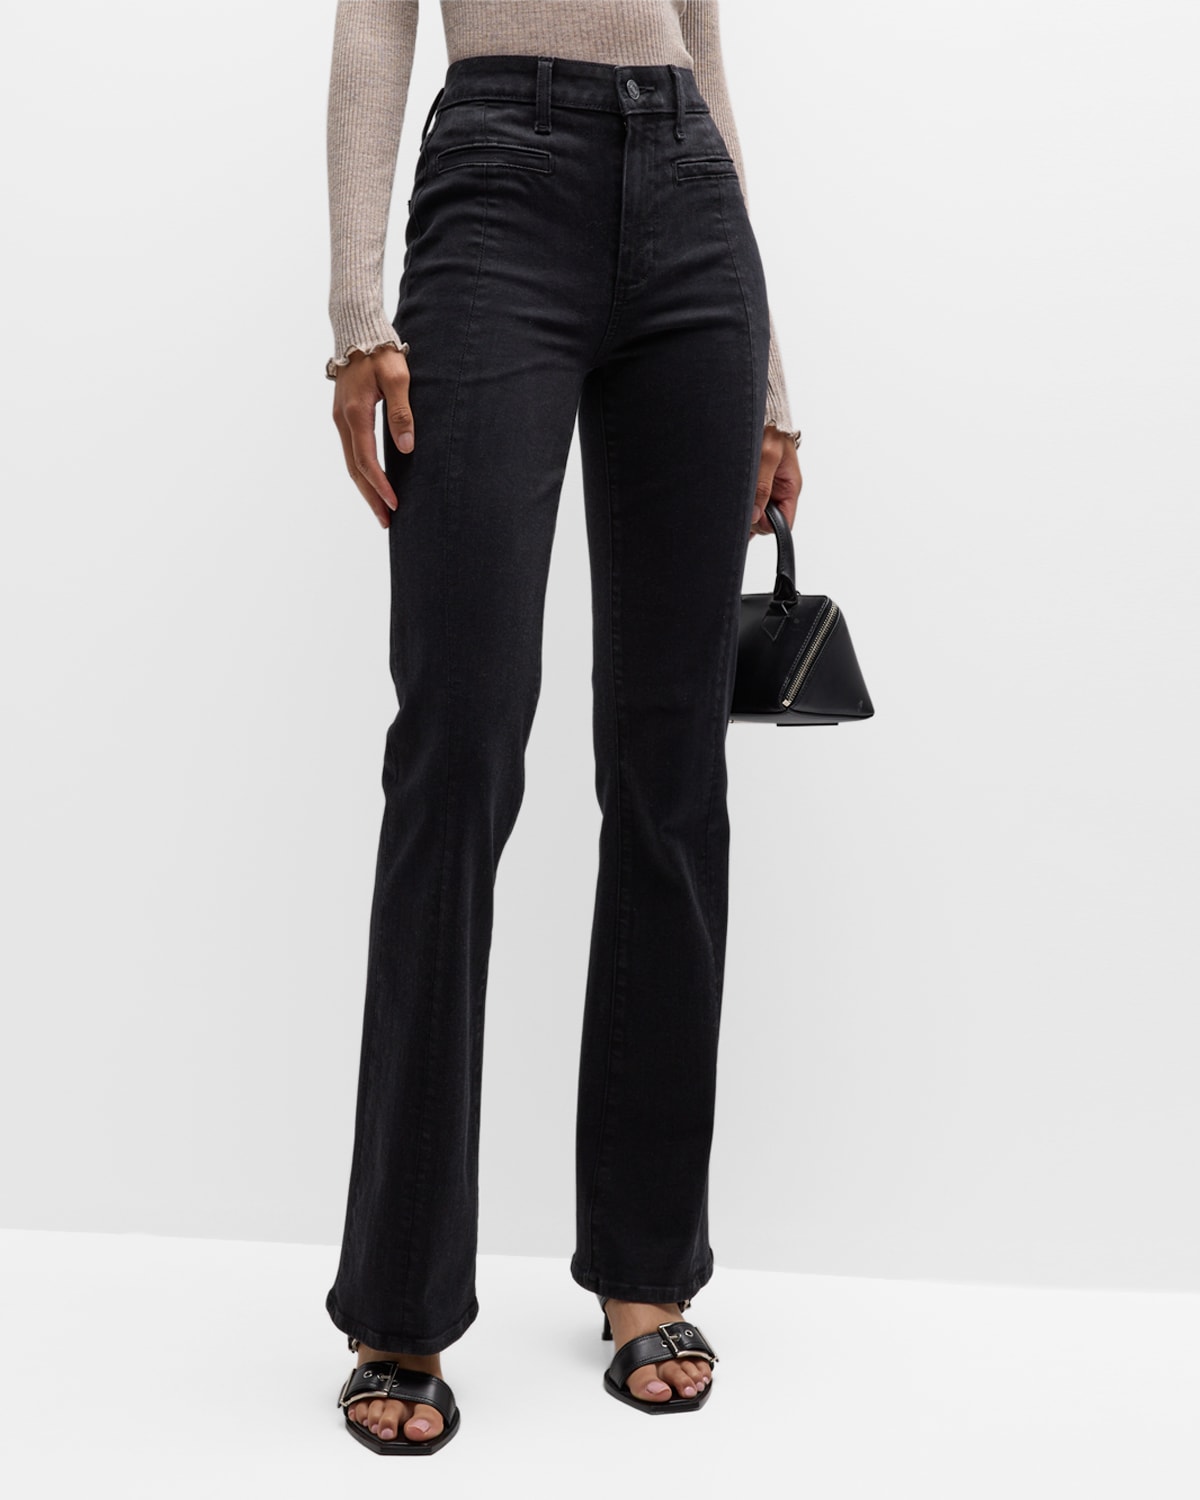 PAIGE HIGH RISE LAUREL CANYON FLARED JEANS